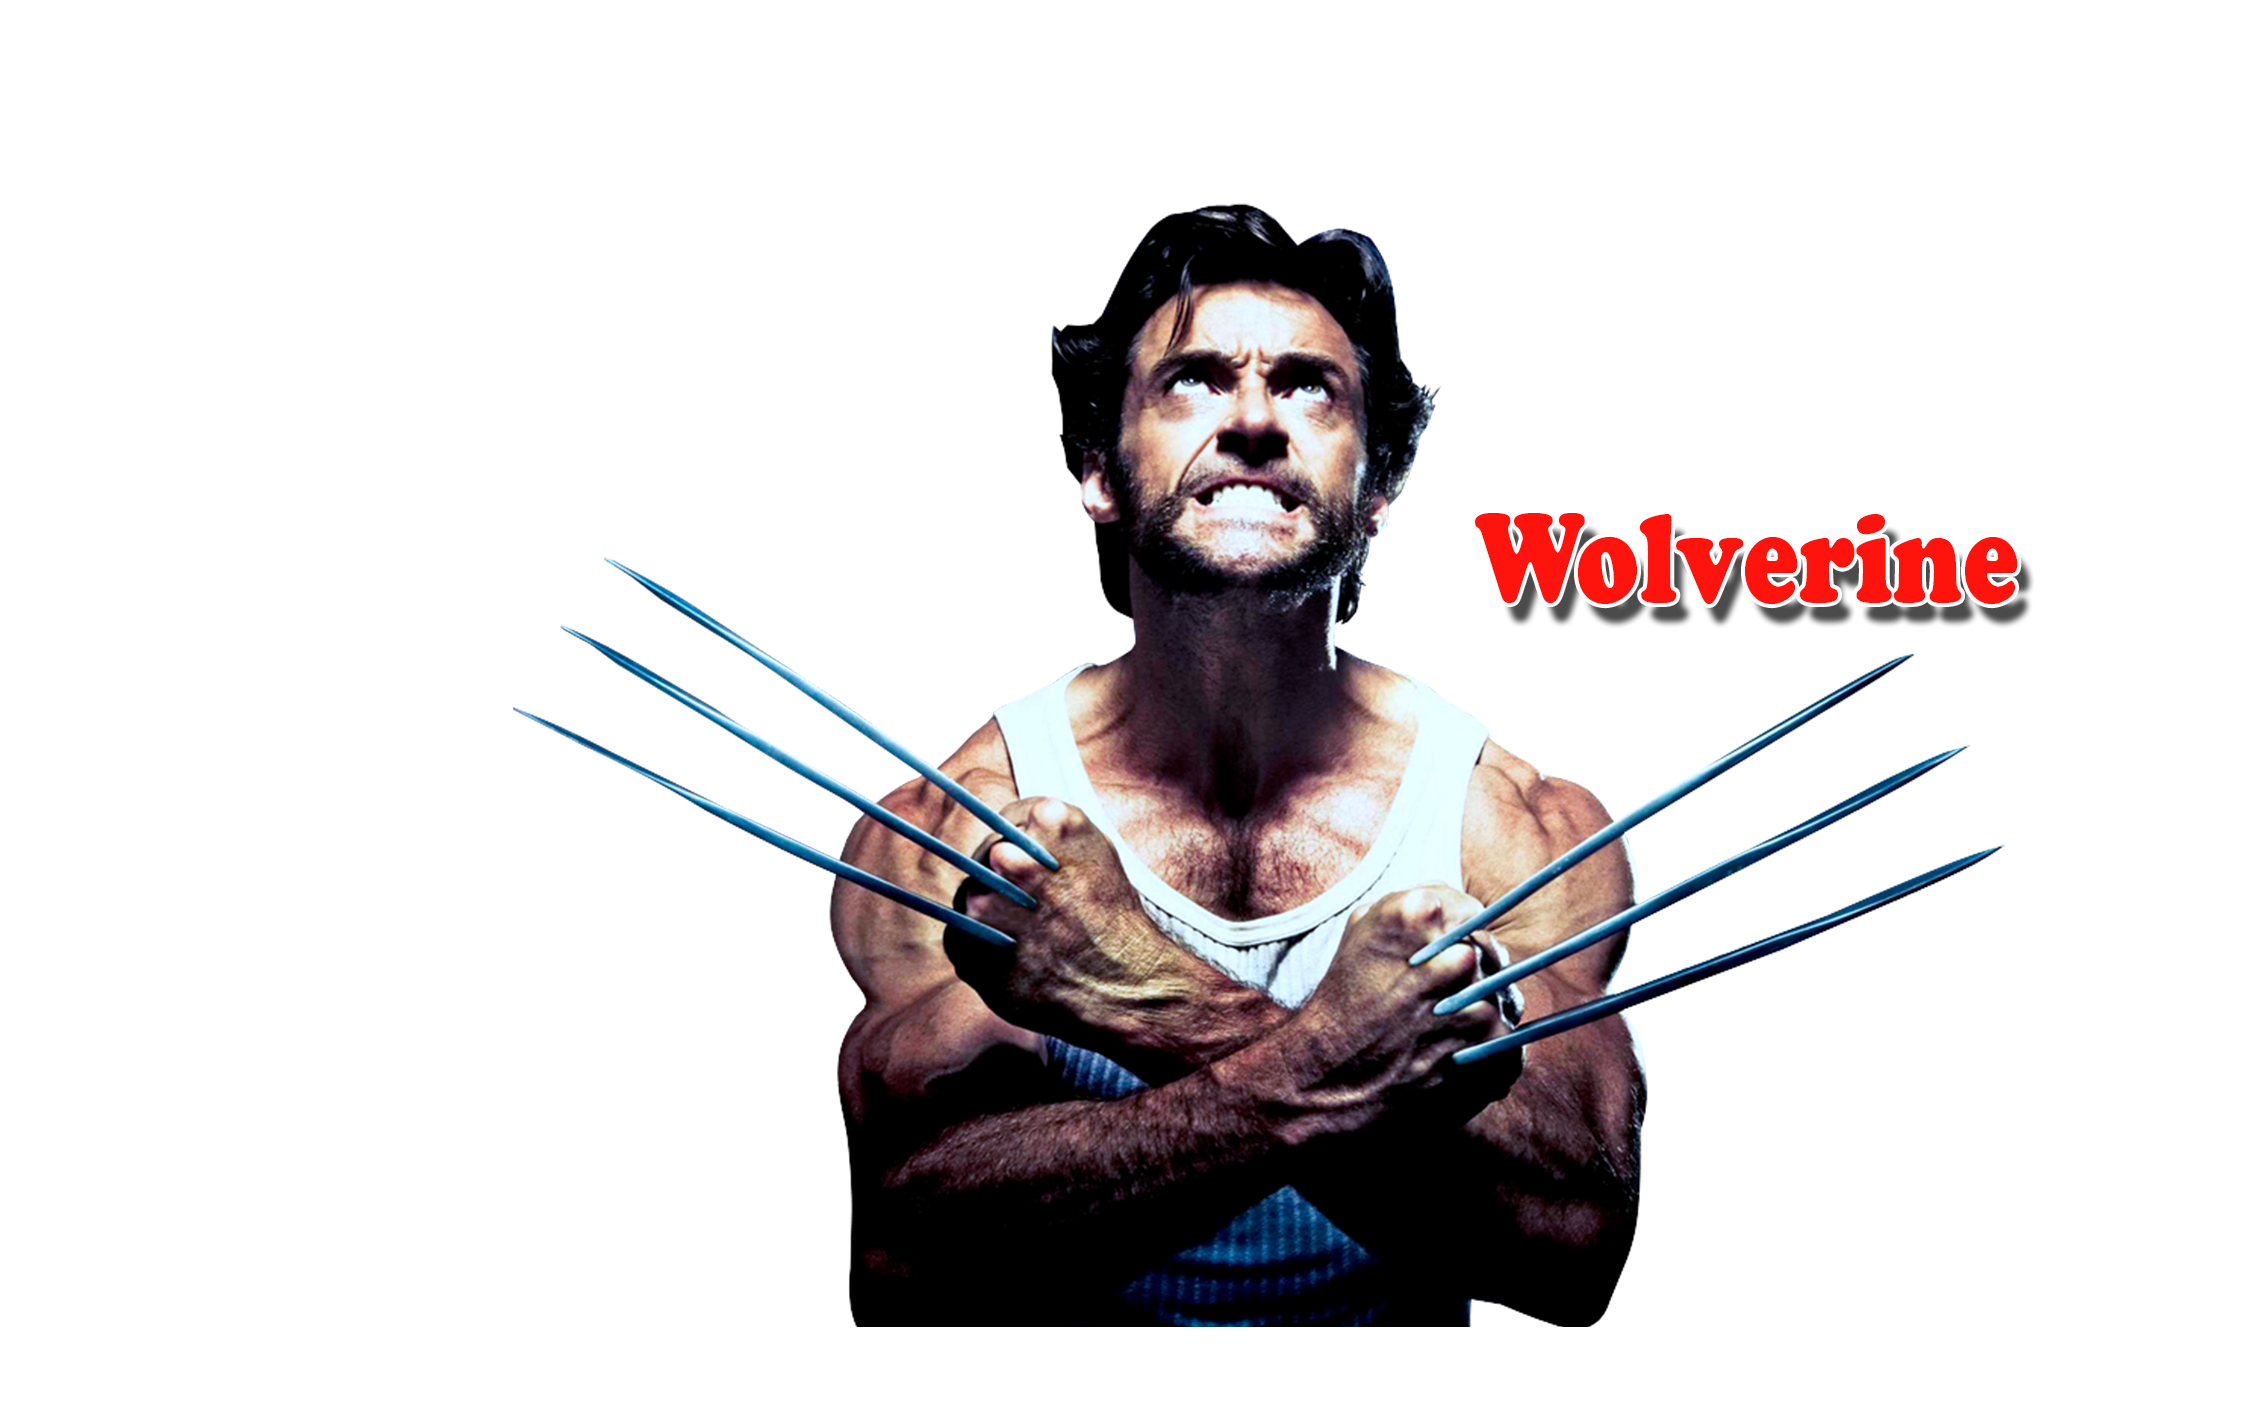 Wolverine PNG HD and HQ Image pngteam.com